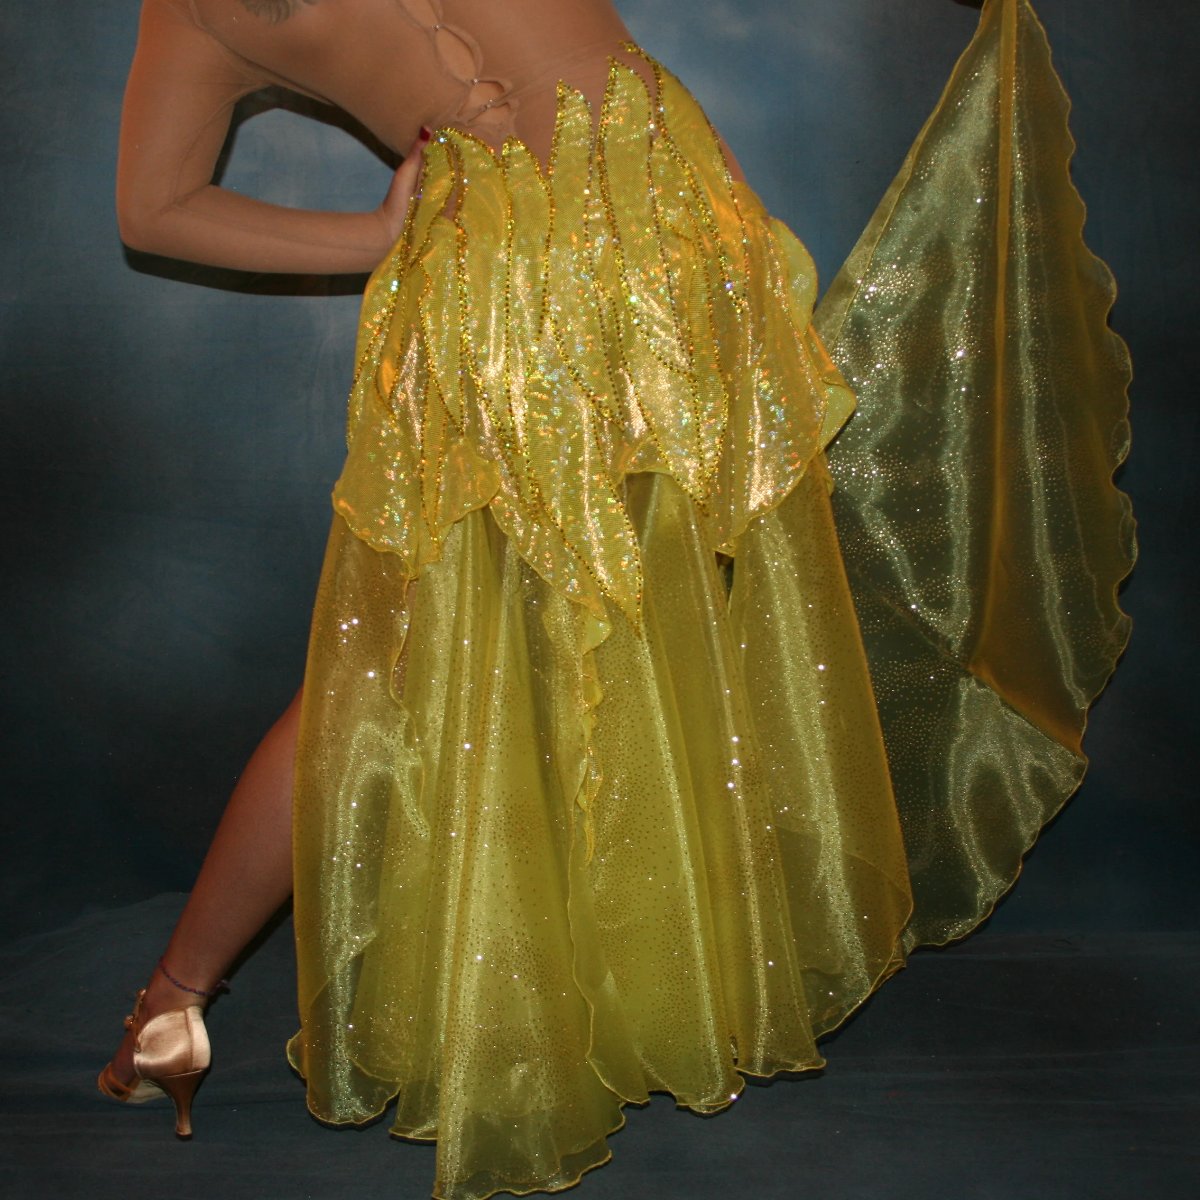 Crystal's Creations close up bottom back view of Yellow Latin/rhythm dress created of yellow hologram lycra, with handcut petal appliques overlaid artistically on nude illusion base,embellished with citrine & jonquil ab Swarovski rhinestones, with converta skirt of yards of glittered organza.